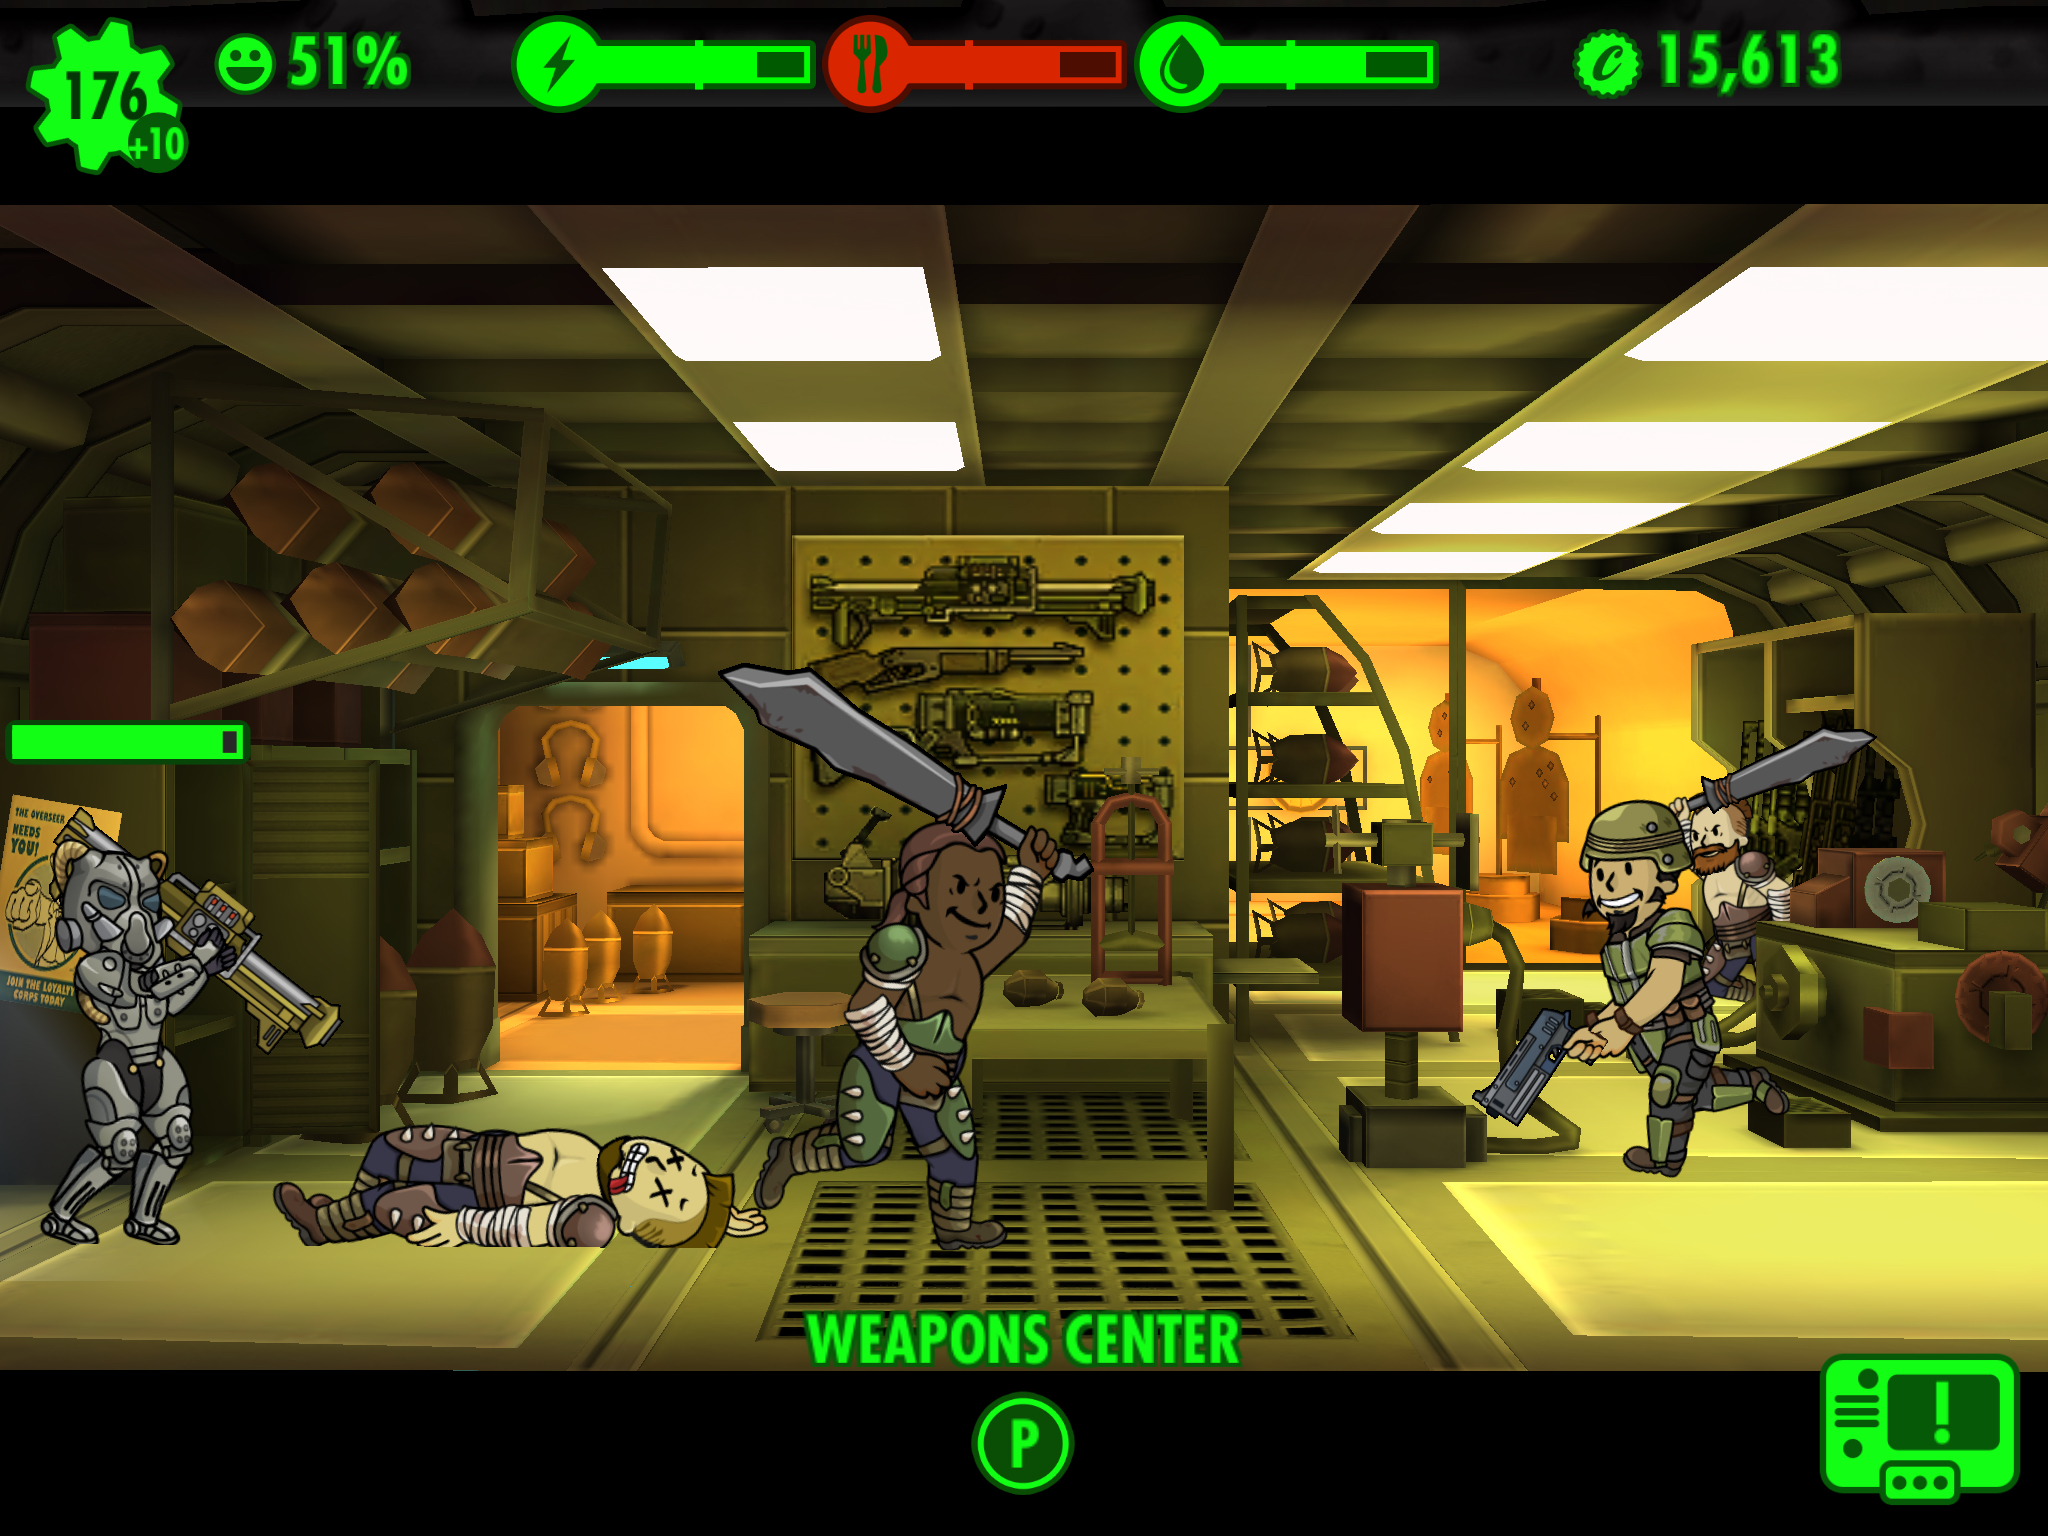 Fallout Shelter. Released for IOS on June 14, 2015 to increase the hype for Fallout 4 has been a huge success. The game despite being "free-to-play" brought Bethesda a lot of money from micro transactions.